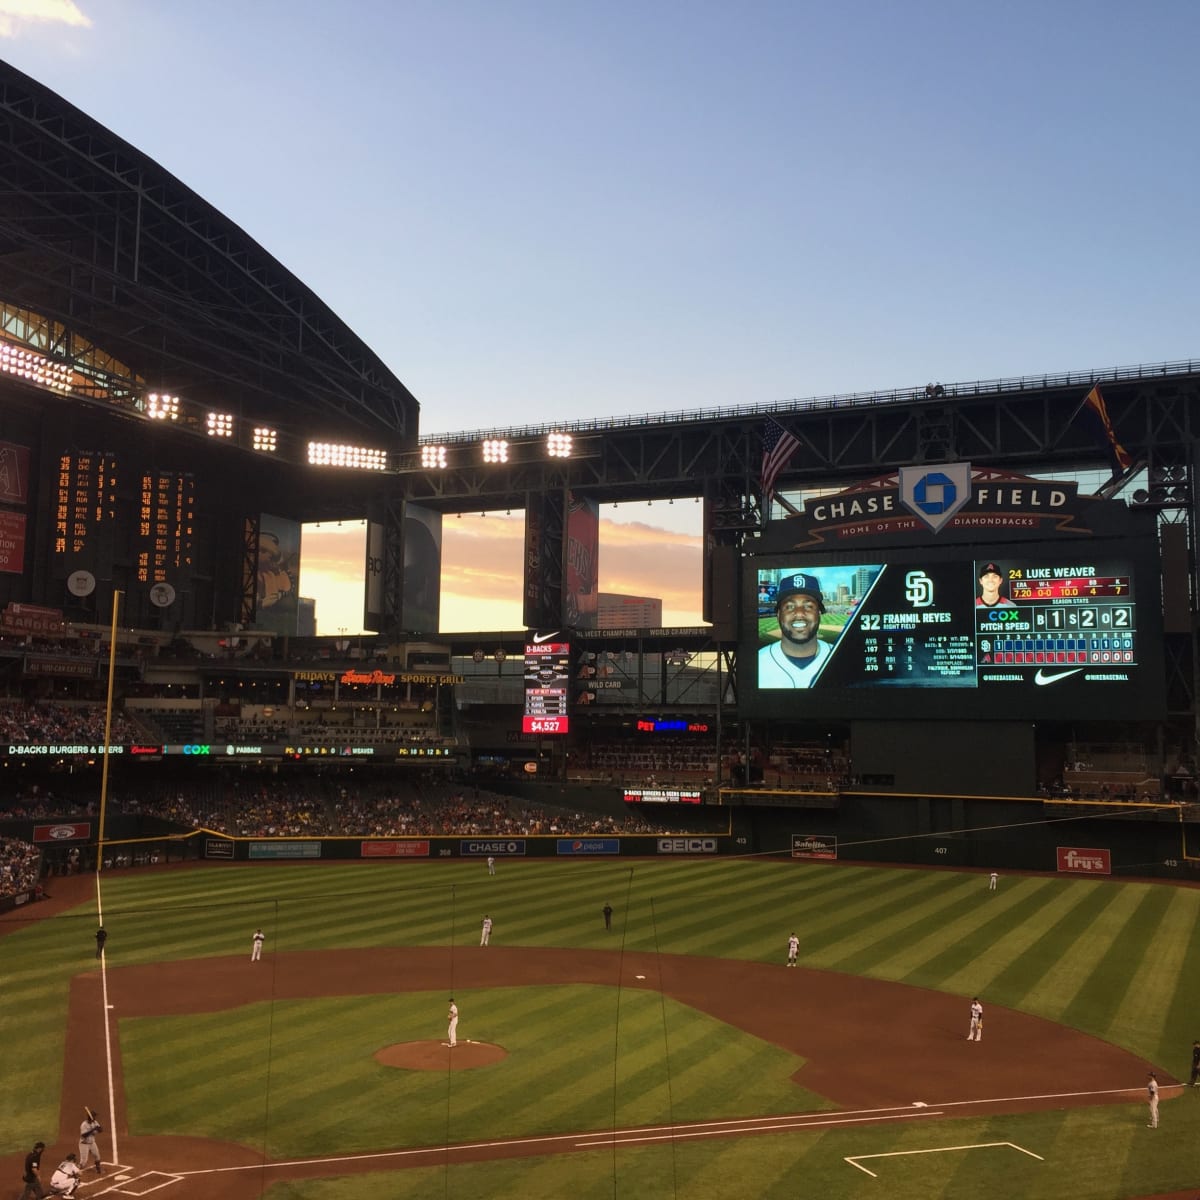 Chase Field (@chasefield) • Instagram photos and videos